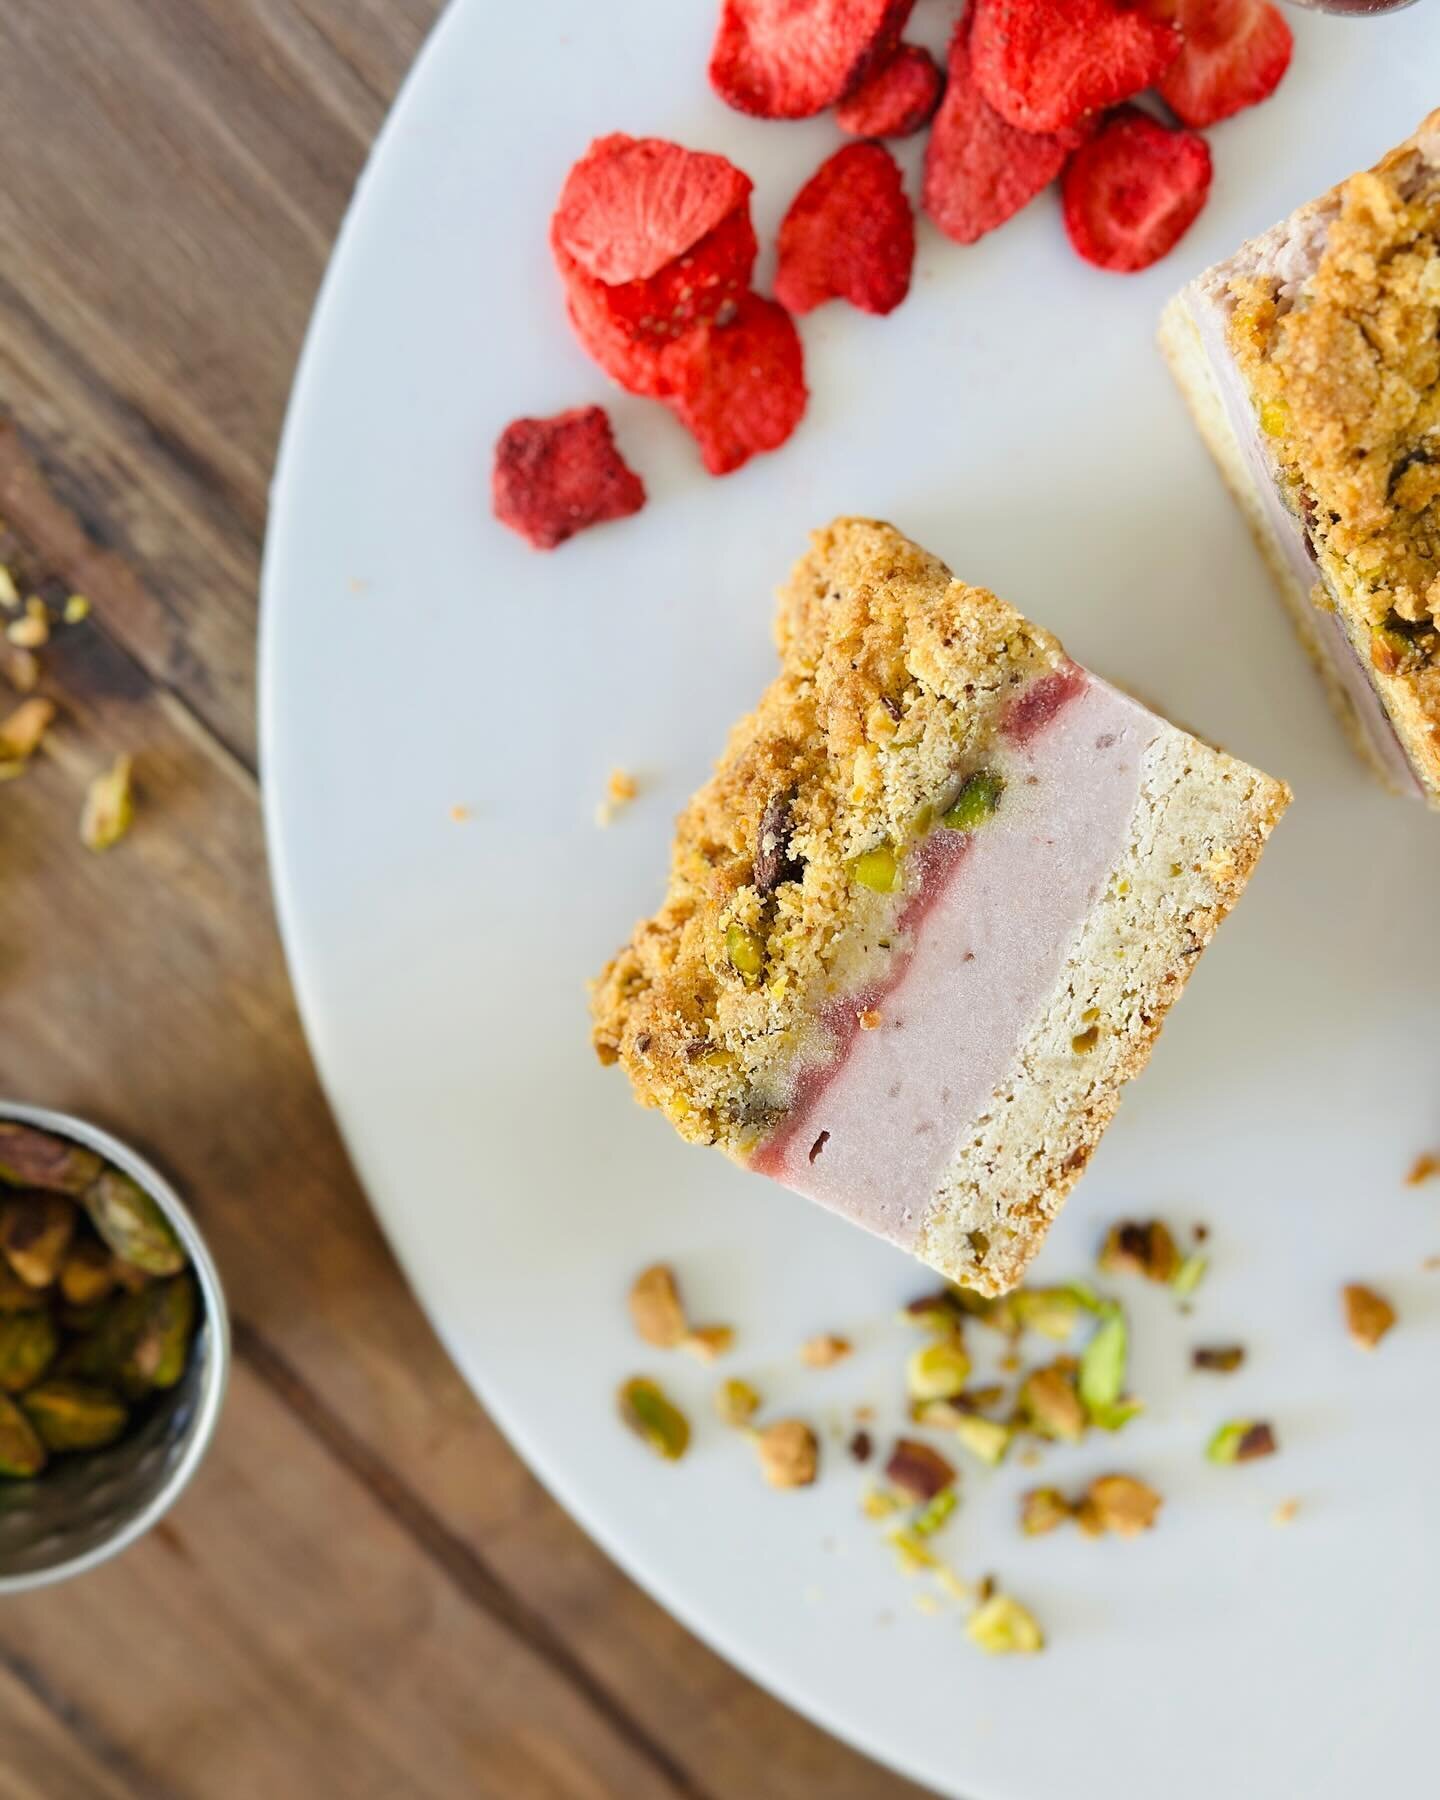 S T R A W B E R R Y  P I S T A C H I O

New item alert! Our strawberry pistachio cheesecake streusel bar. Layered cheesecake with pistachio and strawberries with a streusel topper.

Available now! Come try one on this sunny Thursday.

🍓🍰🍓🍰🍓🍰🍓